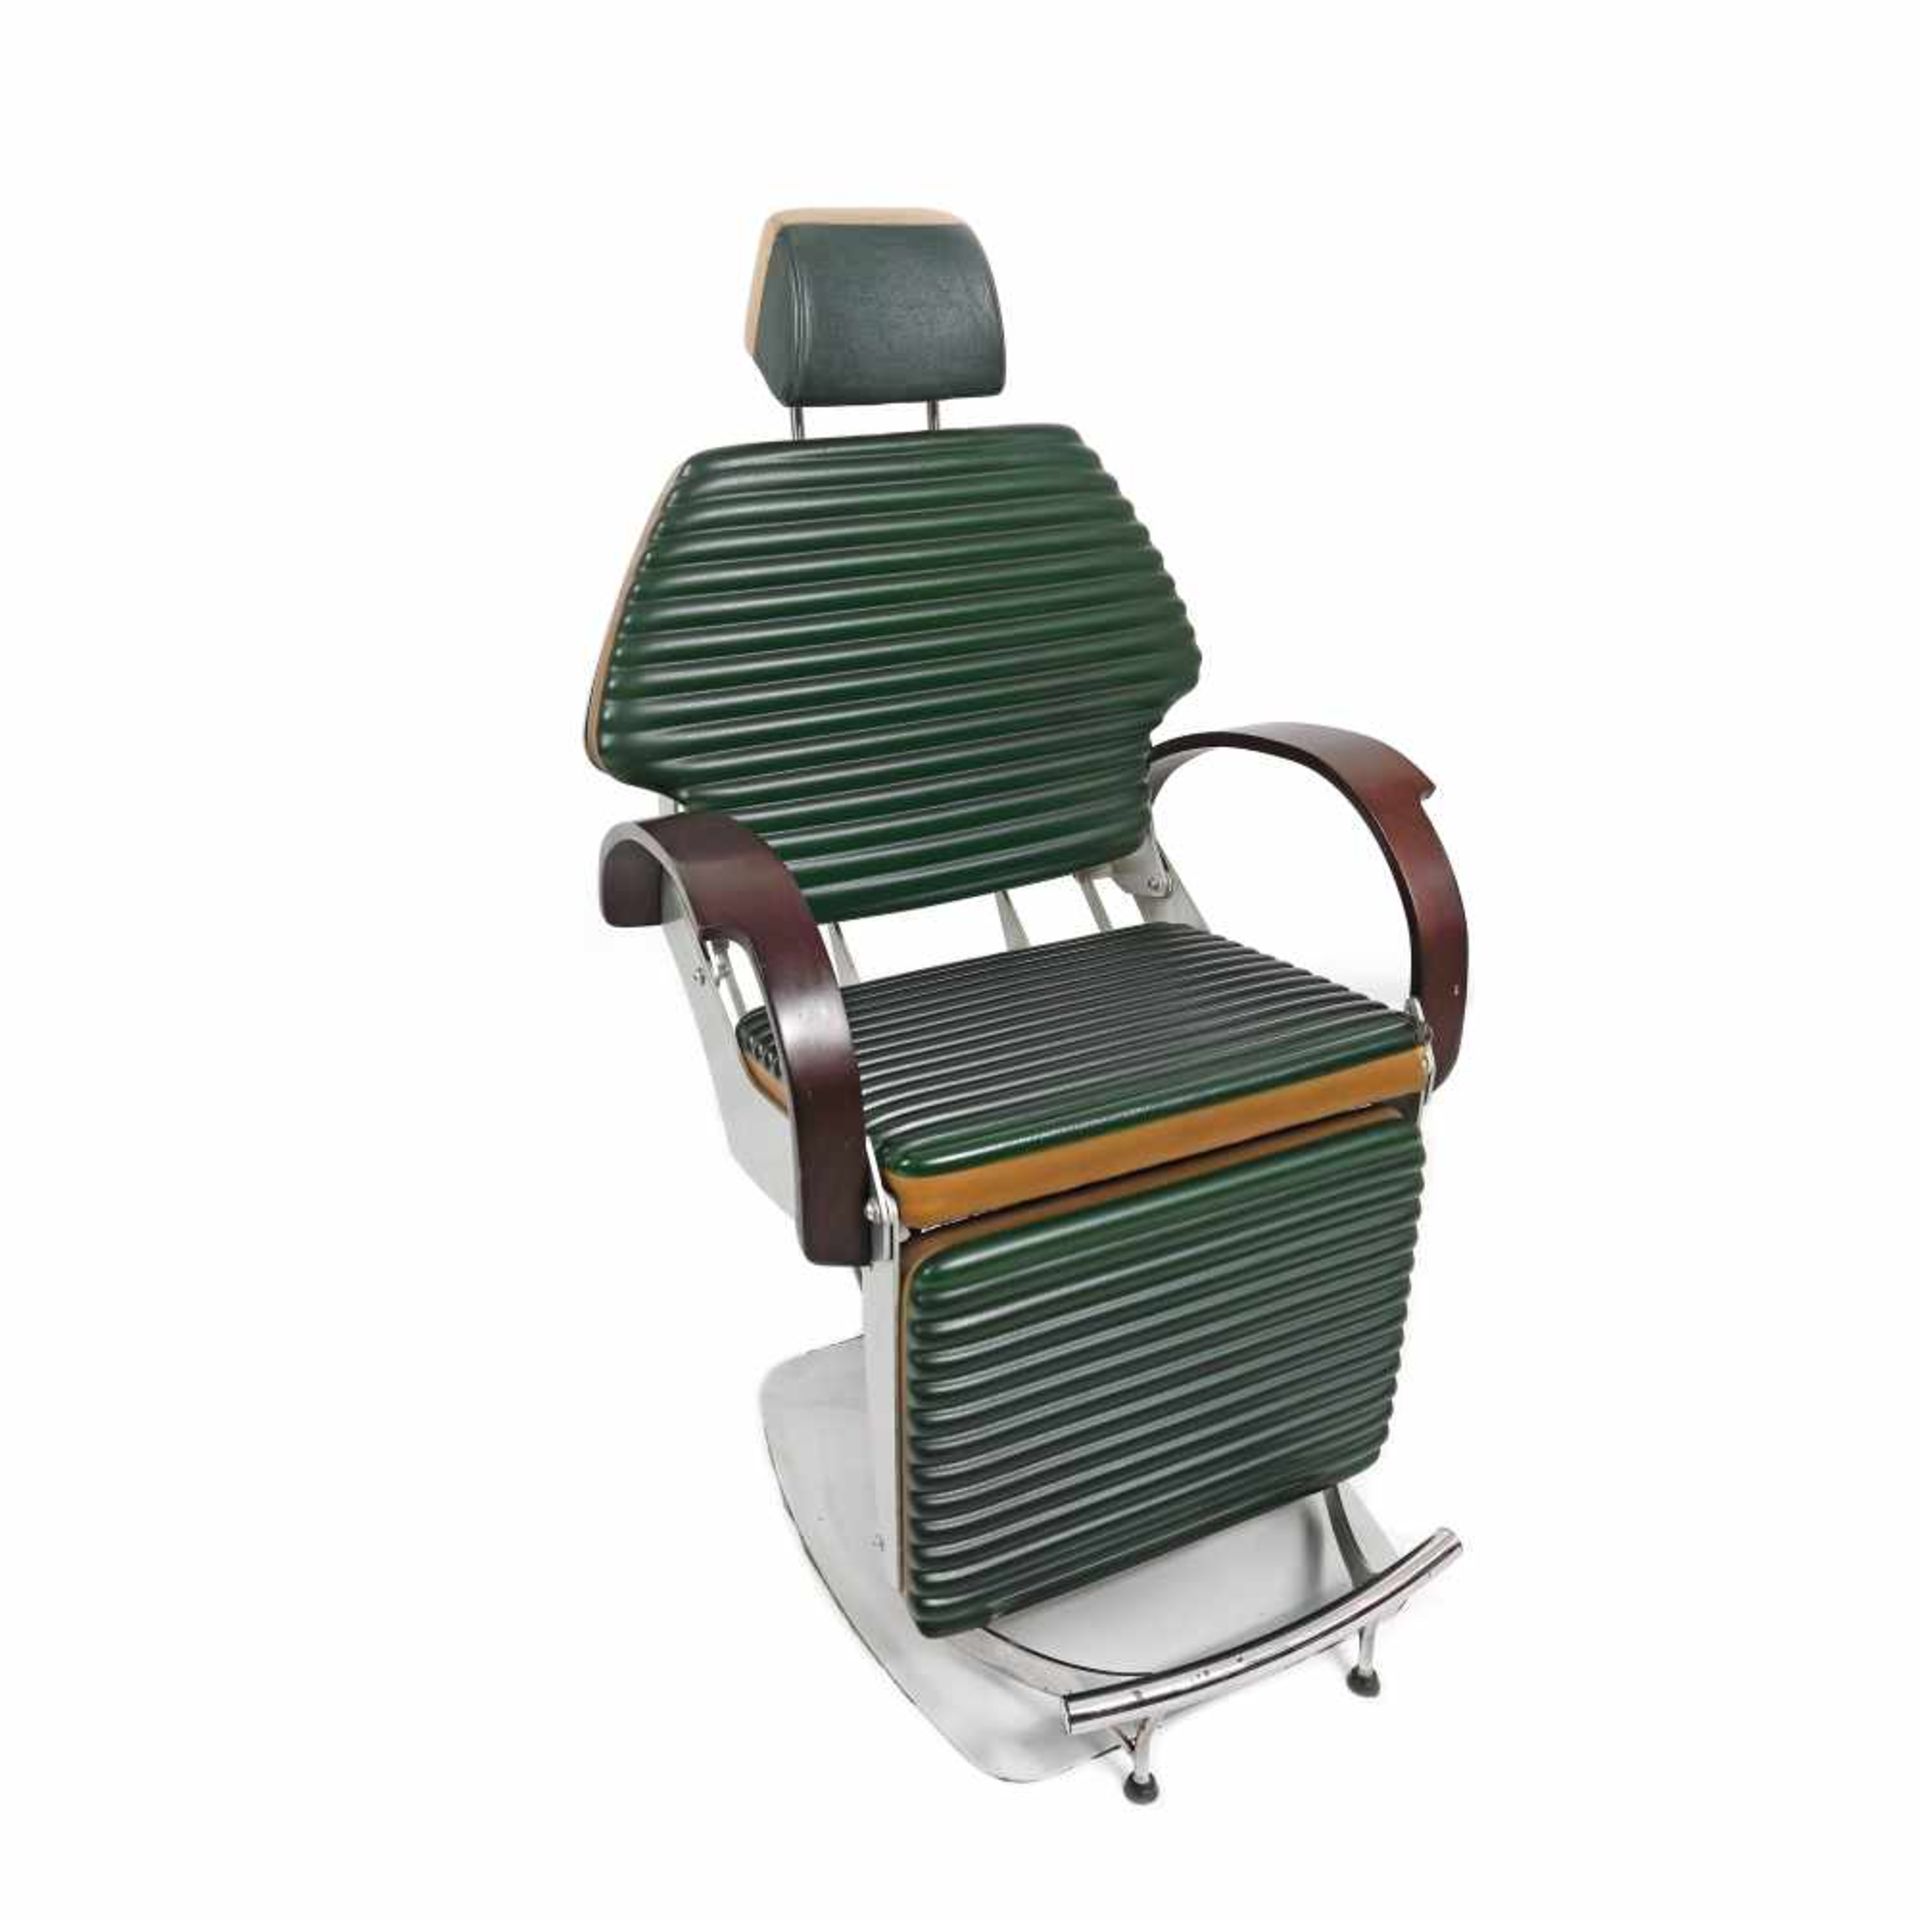 Barber chair, United States of America, approx. 1960-1970